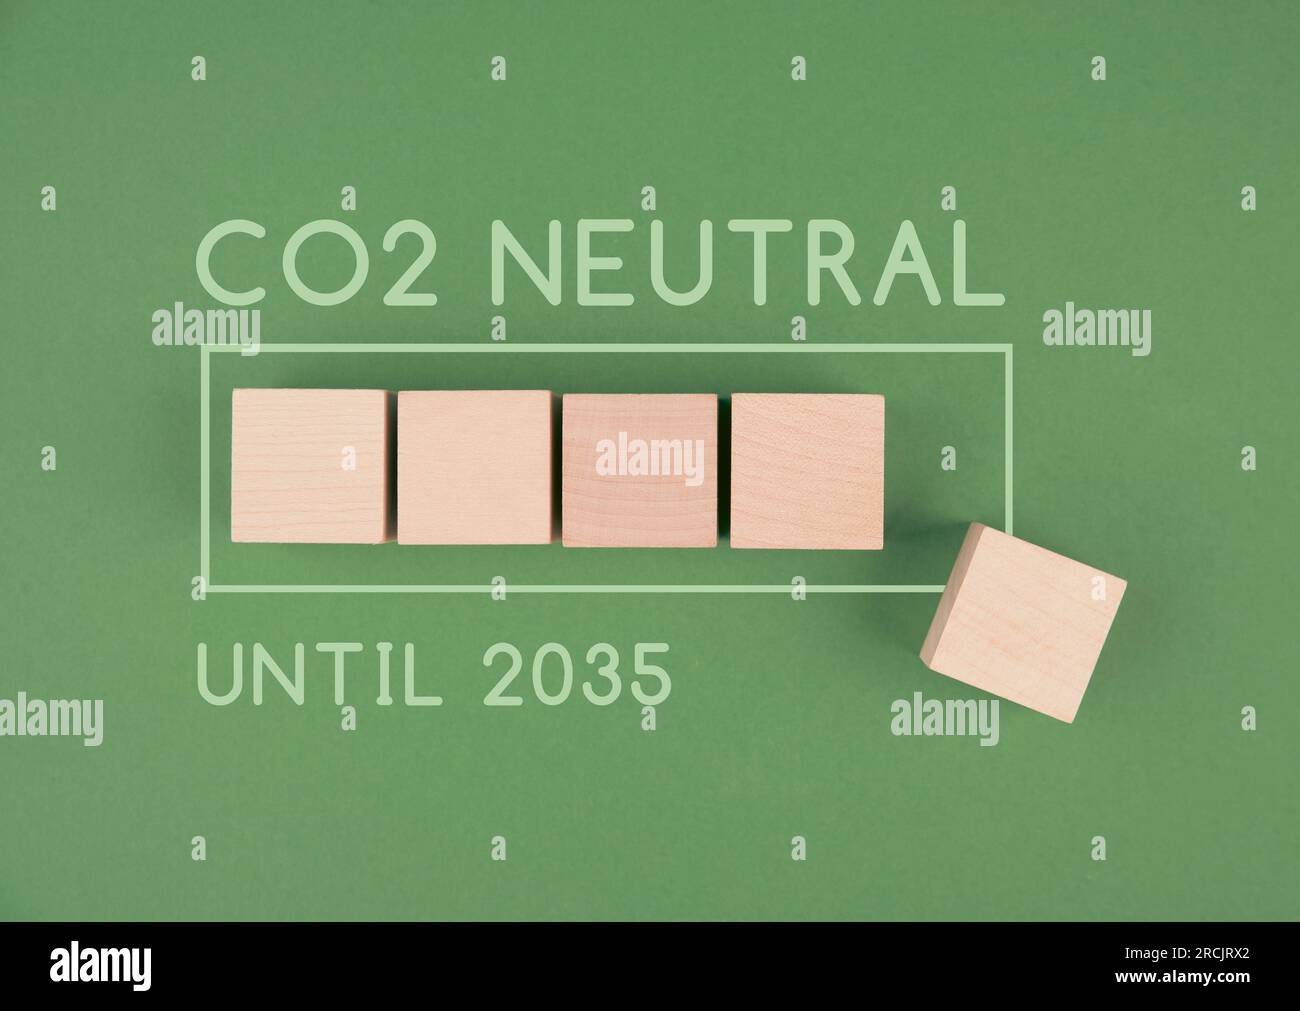 CO2 emission neutral until 2035, loading bar for green energy, carbon reduce footprint, sustainable renewable electricity , environment protection, ec Stock Photo